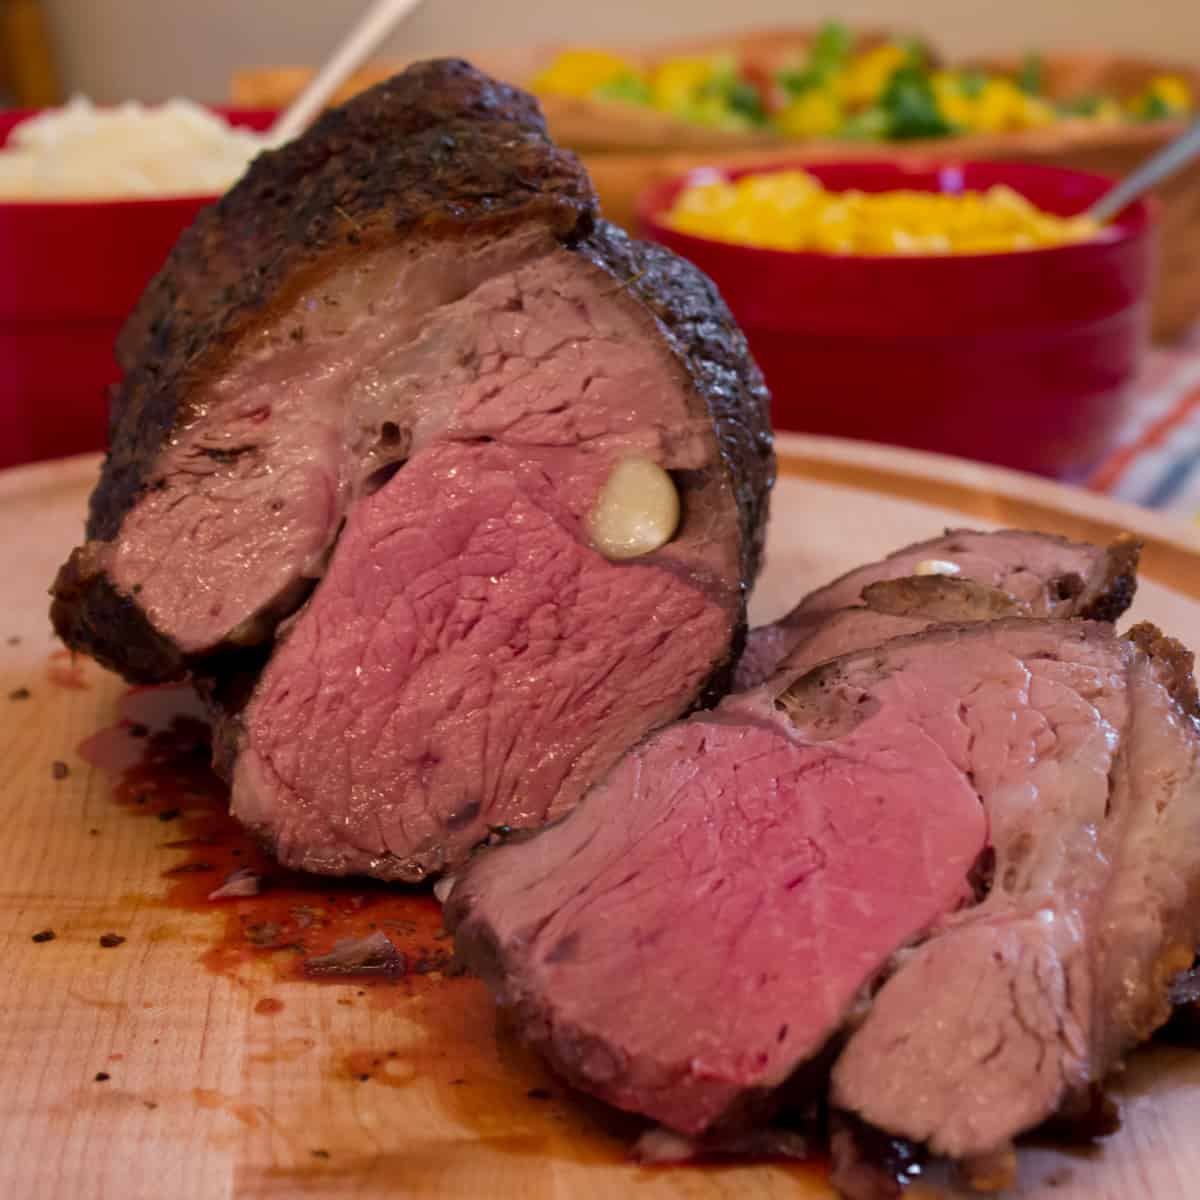 A sliced beef roast with mashed potatoes and corn in the background.